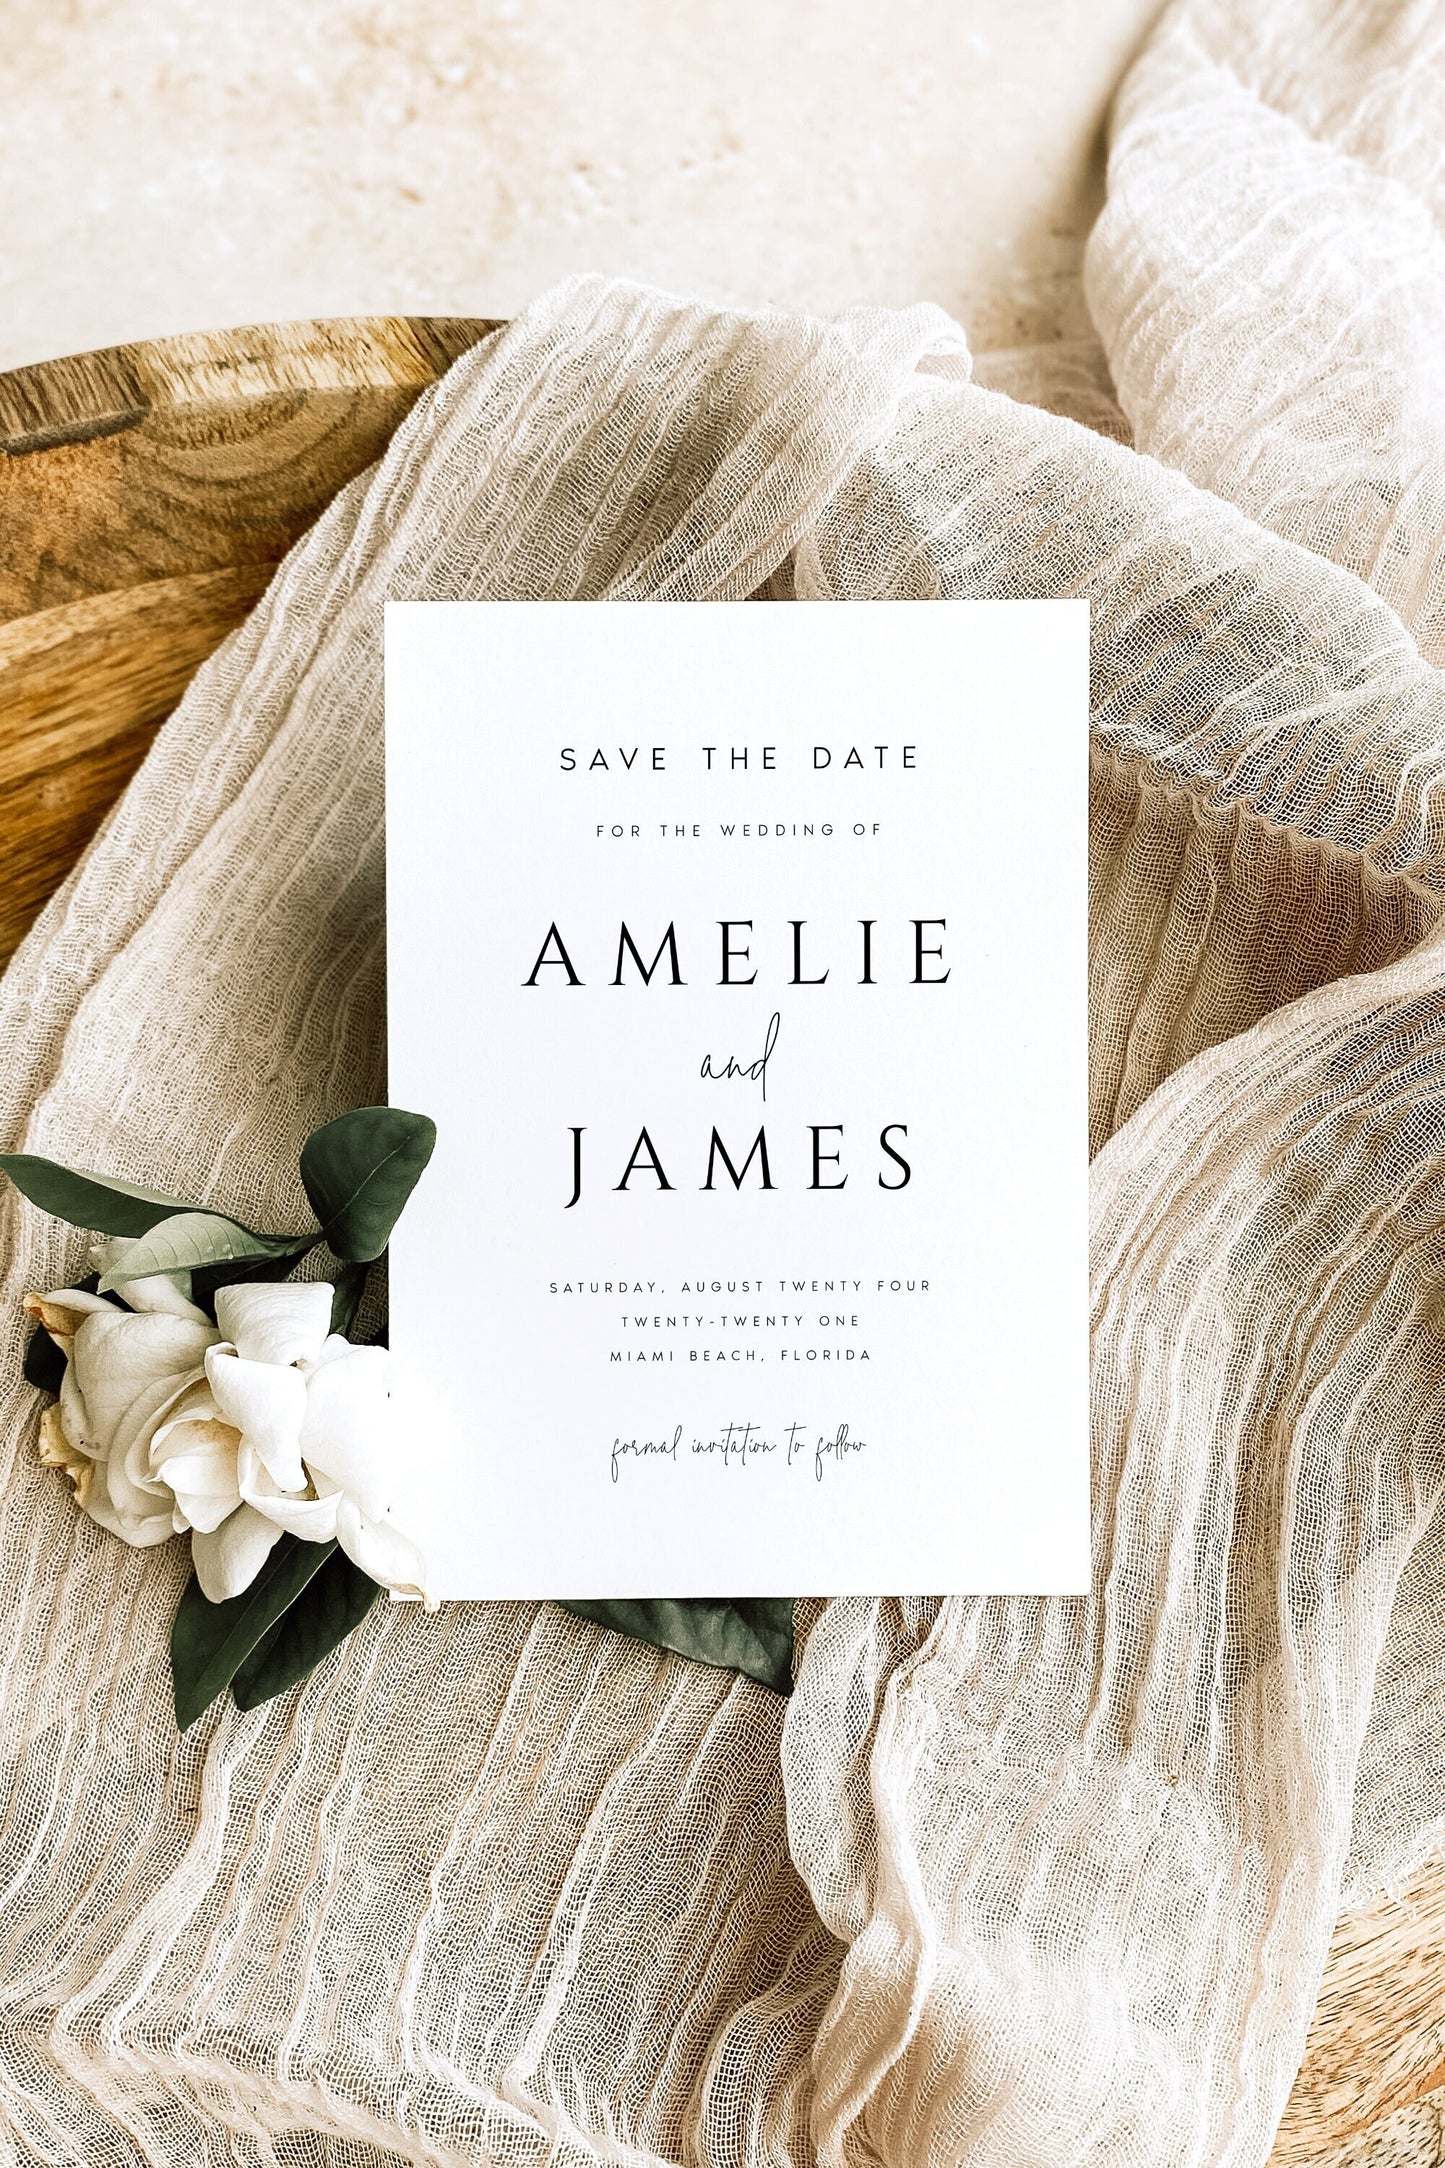 Amelie Save the Date Editable Template